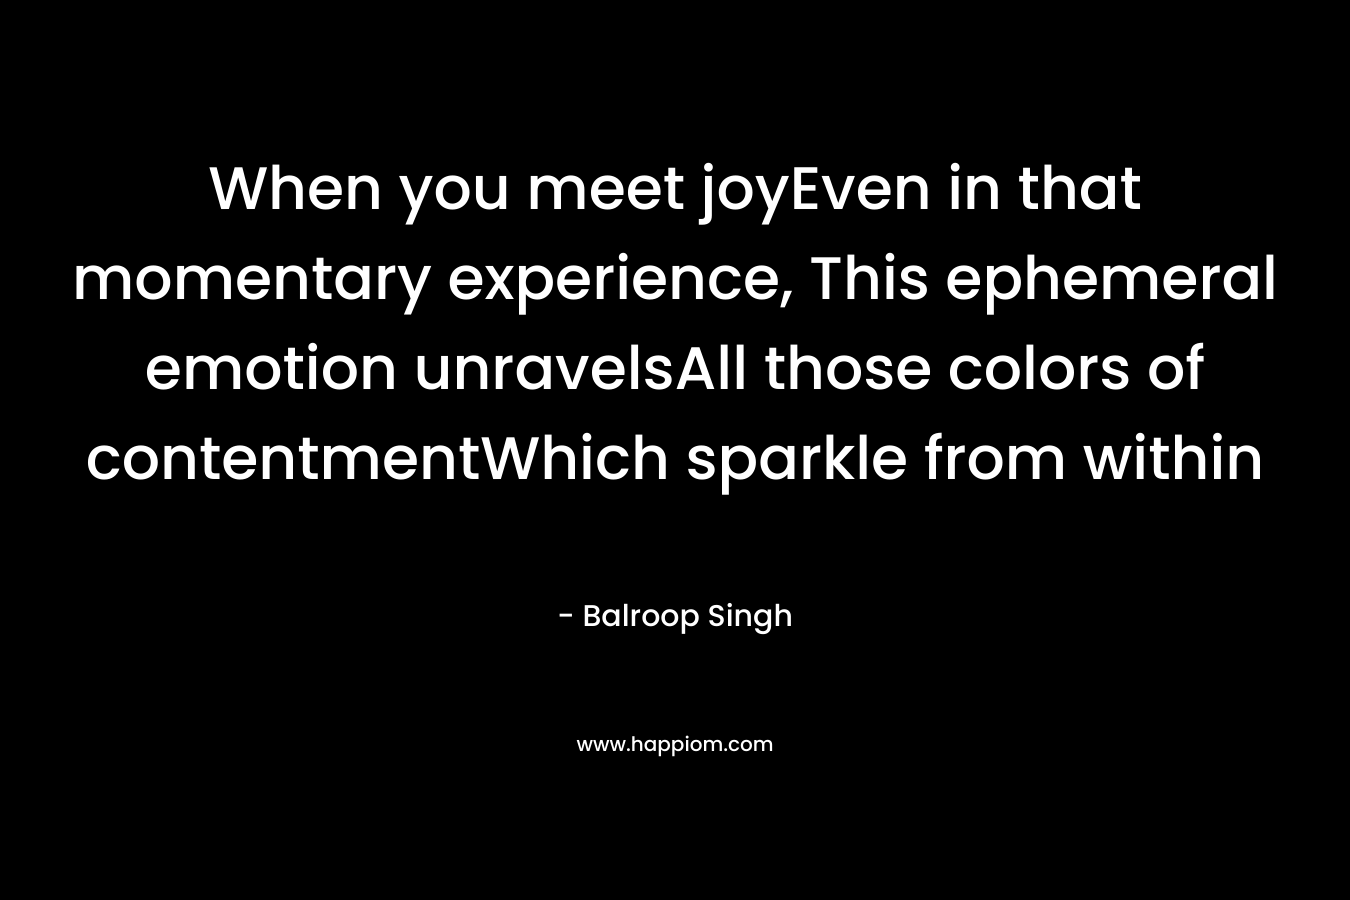 When you meet joyEven in that momentary experience, This ephemeral emotion unravelsAll those colors of contentmentWhich sparkle from within